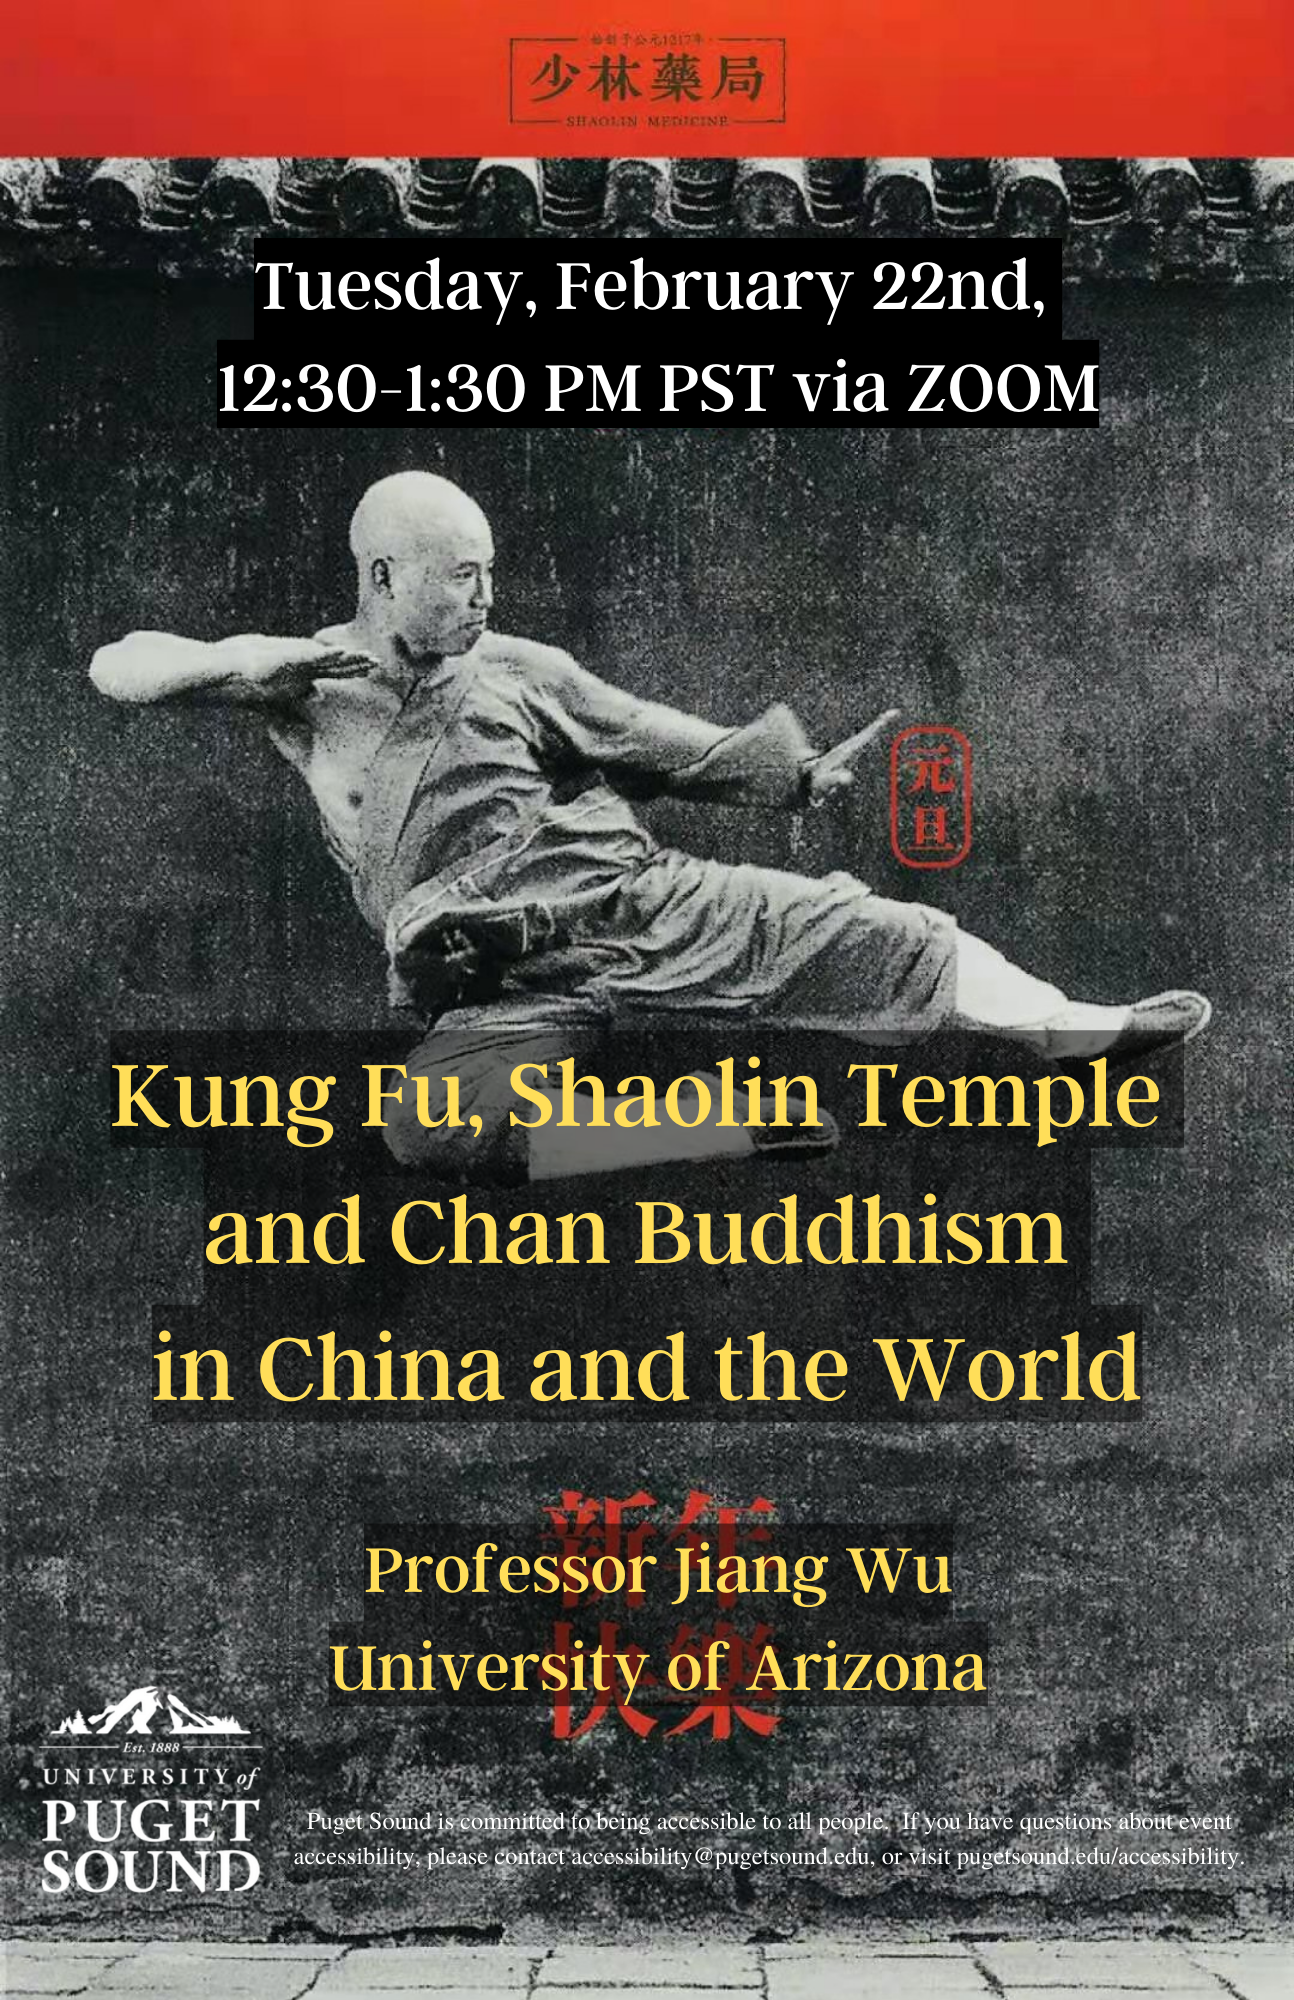 Kung Fu, Shaolin Temple and Chan Buddhism in China and the World poster